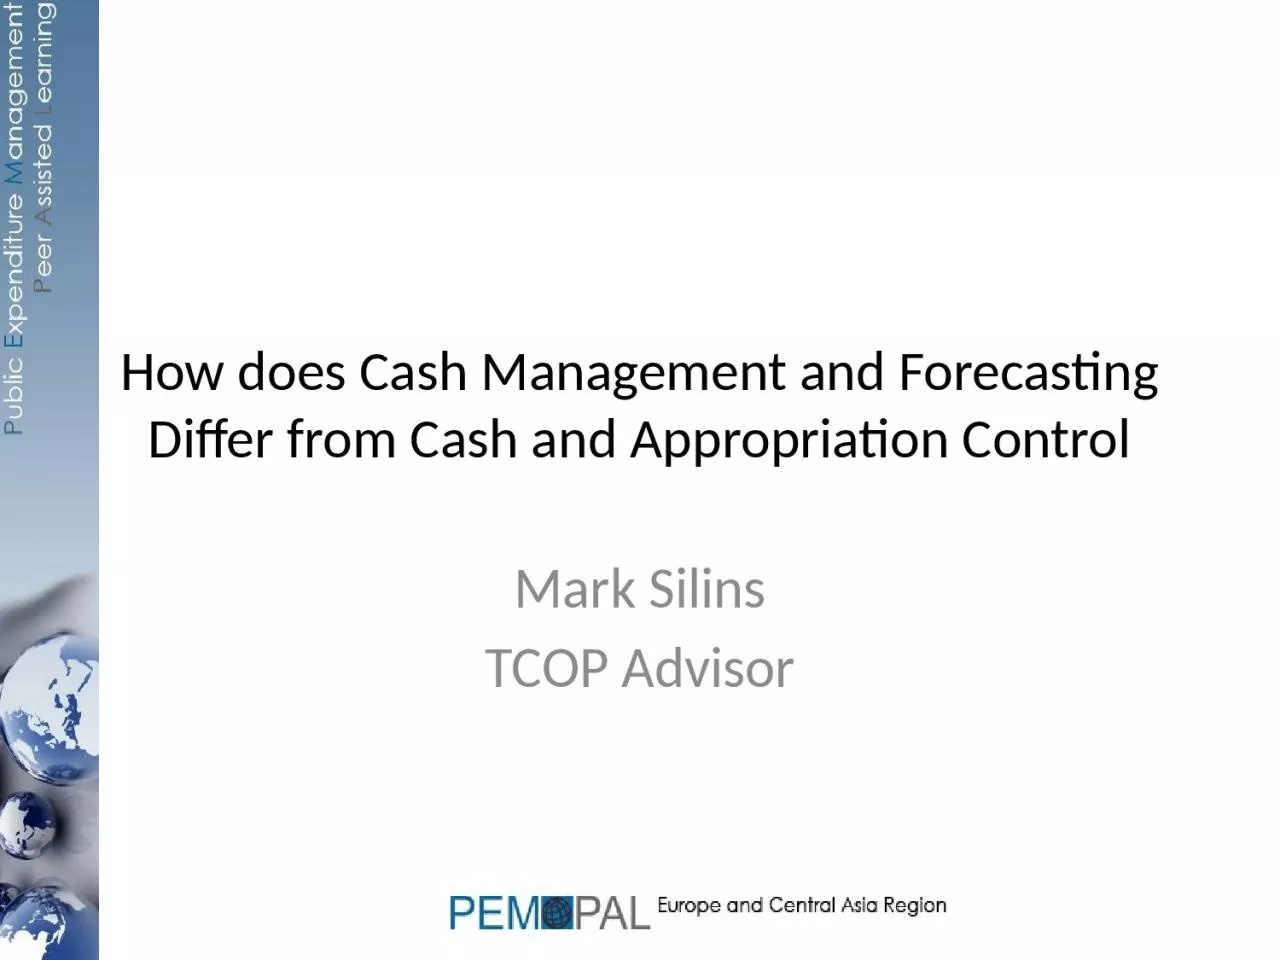 How does Cash Management and Forecasting Differ from Cash and Appropriation Control